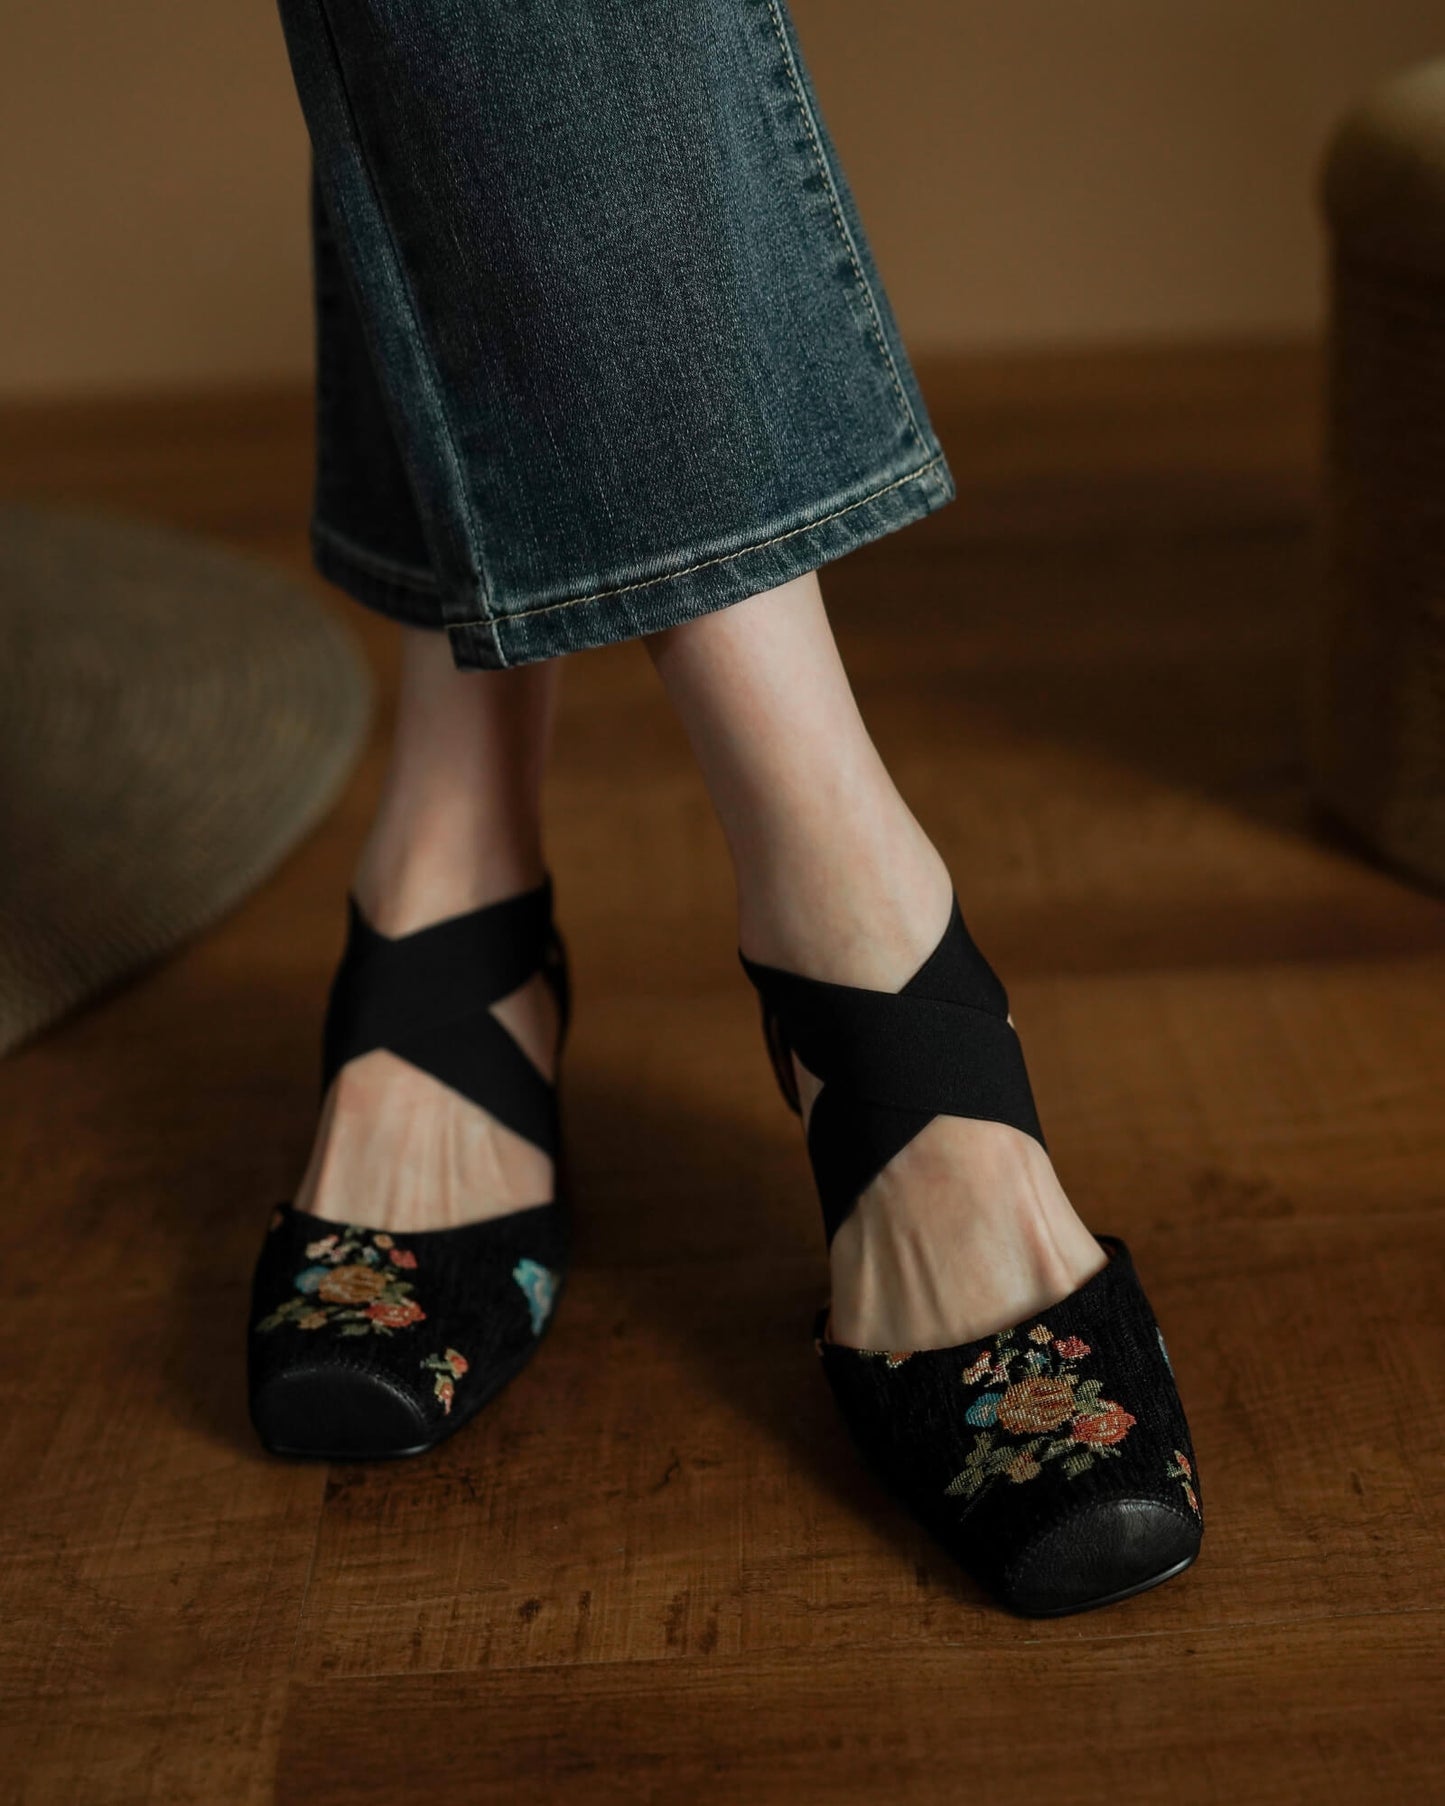 Salin - Embroidery Pumps